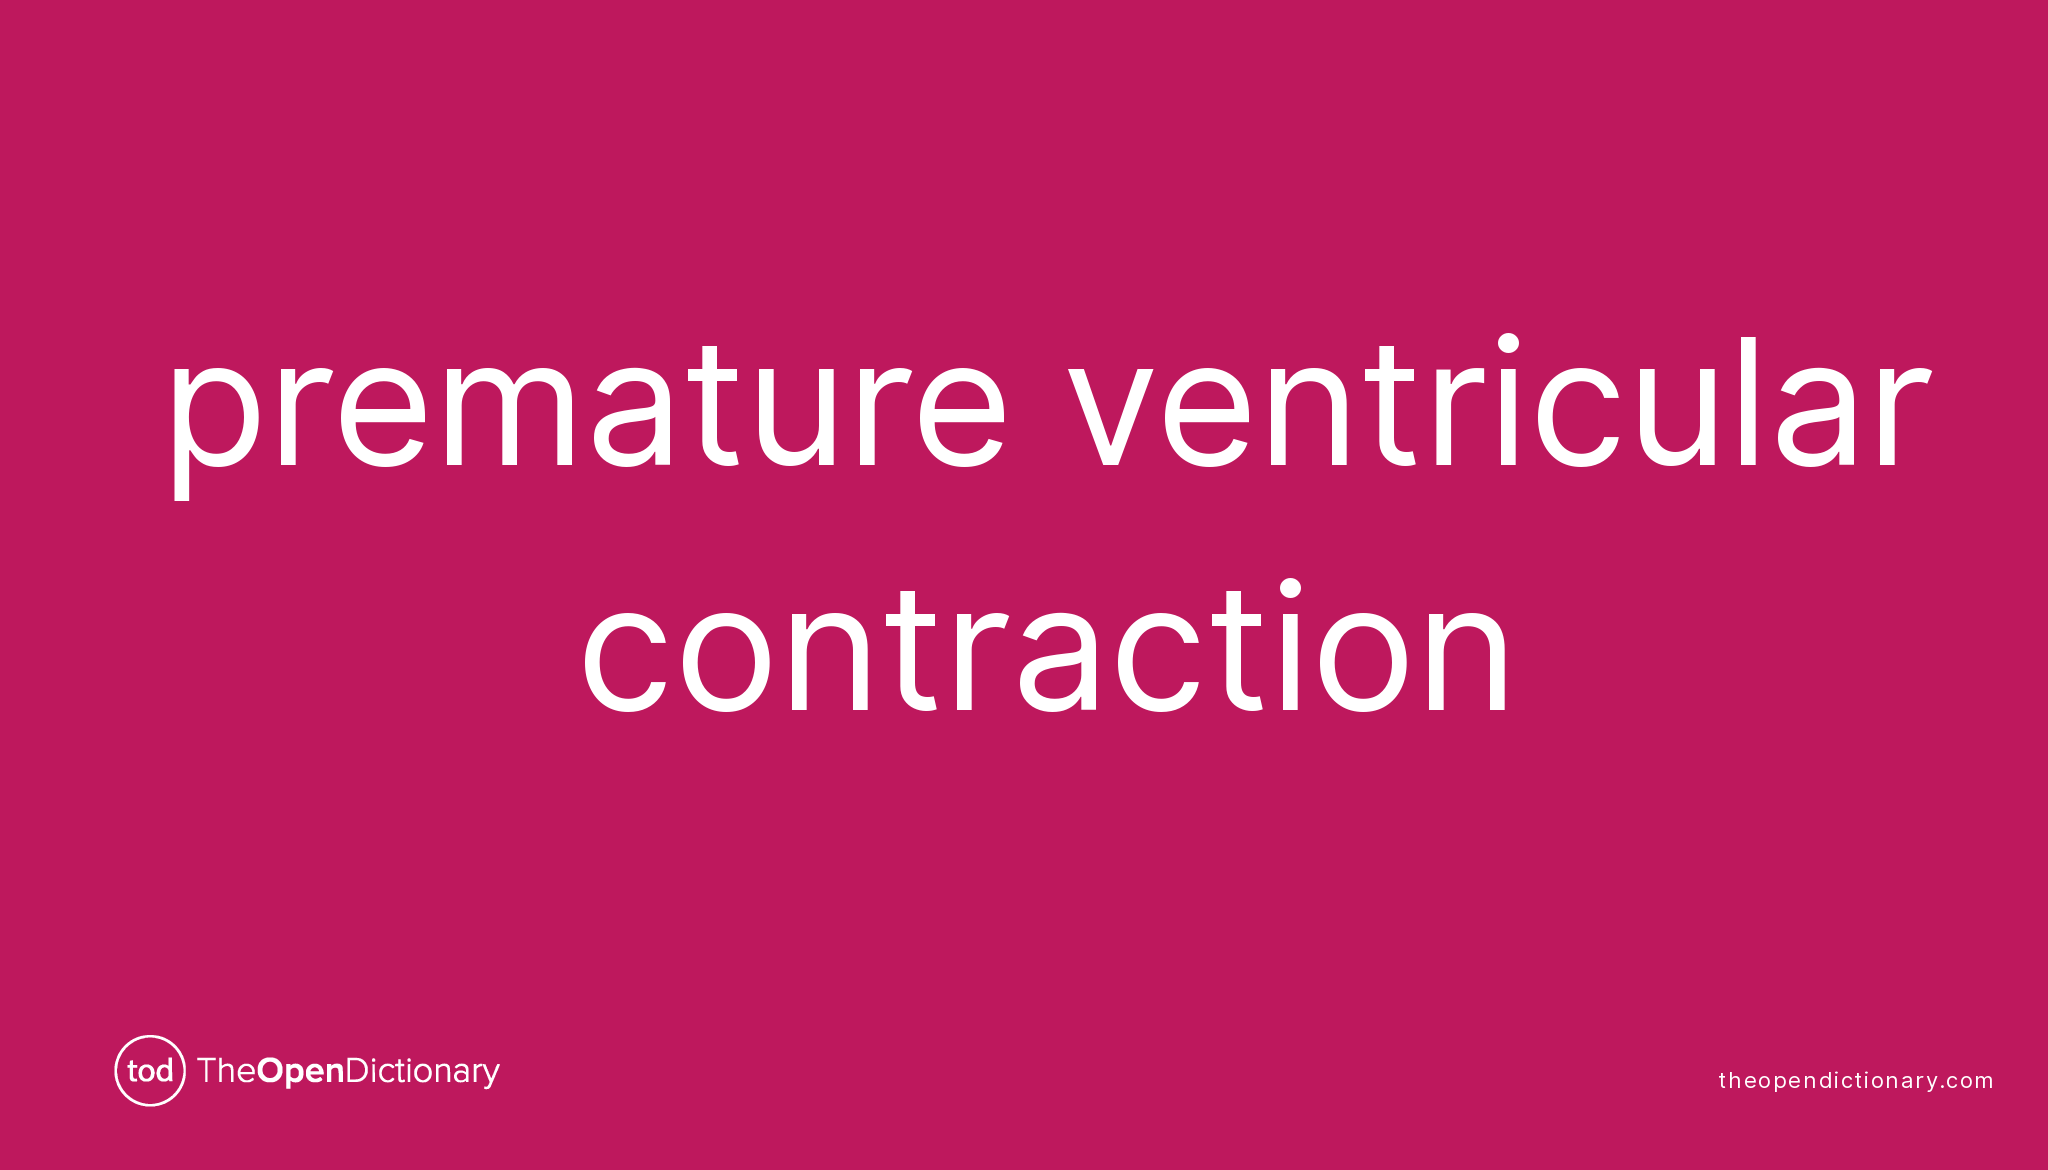 Premature ventricular contraction | Meaning of Premature ventricular ...